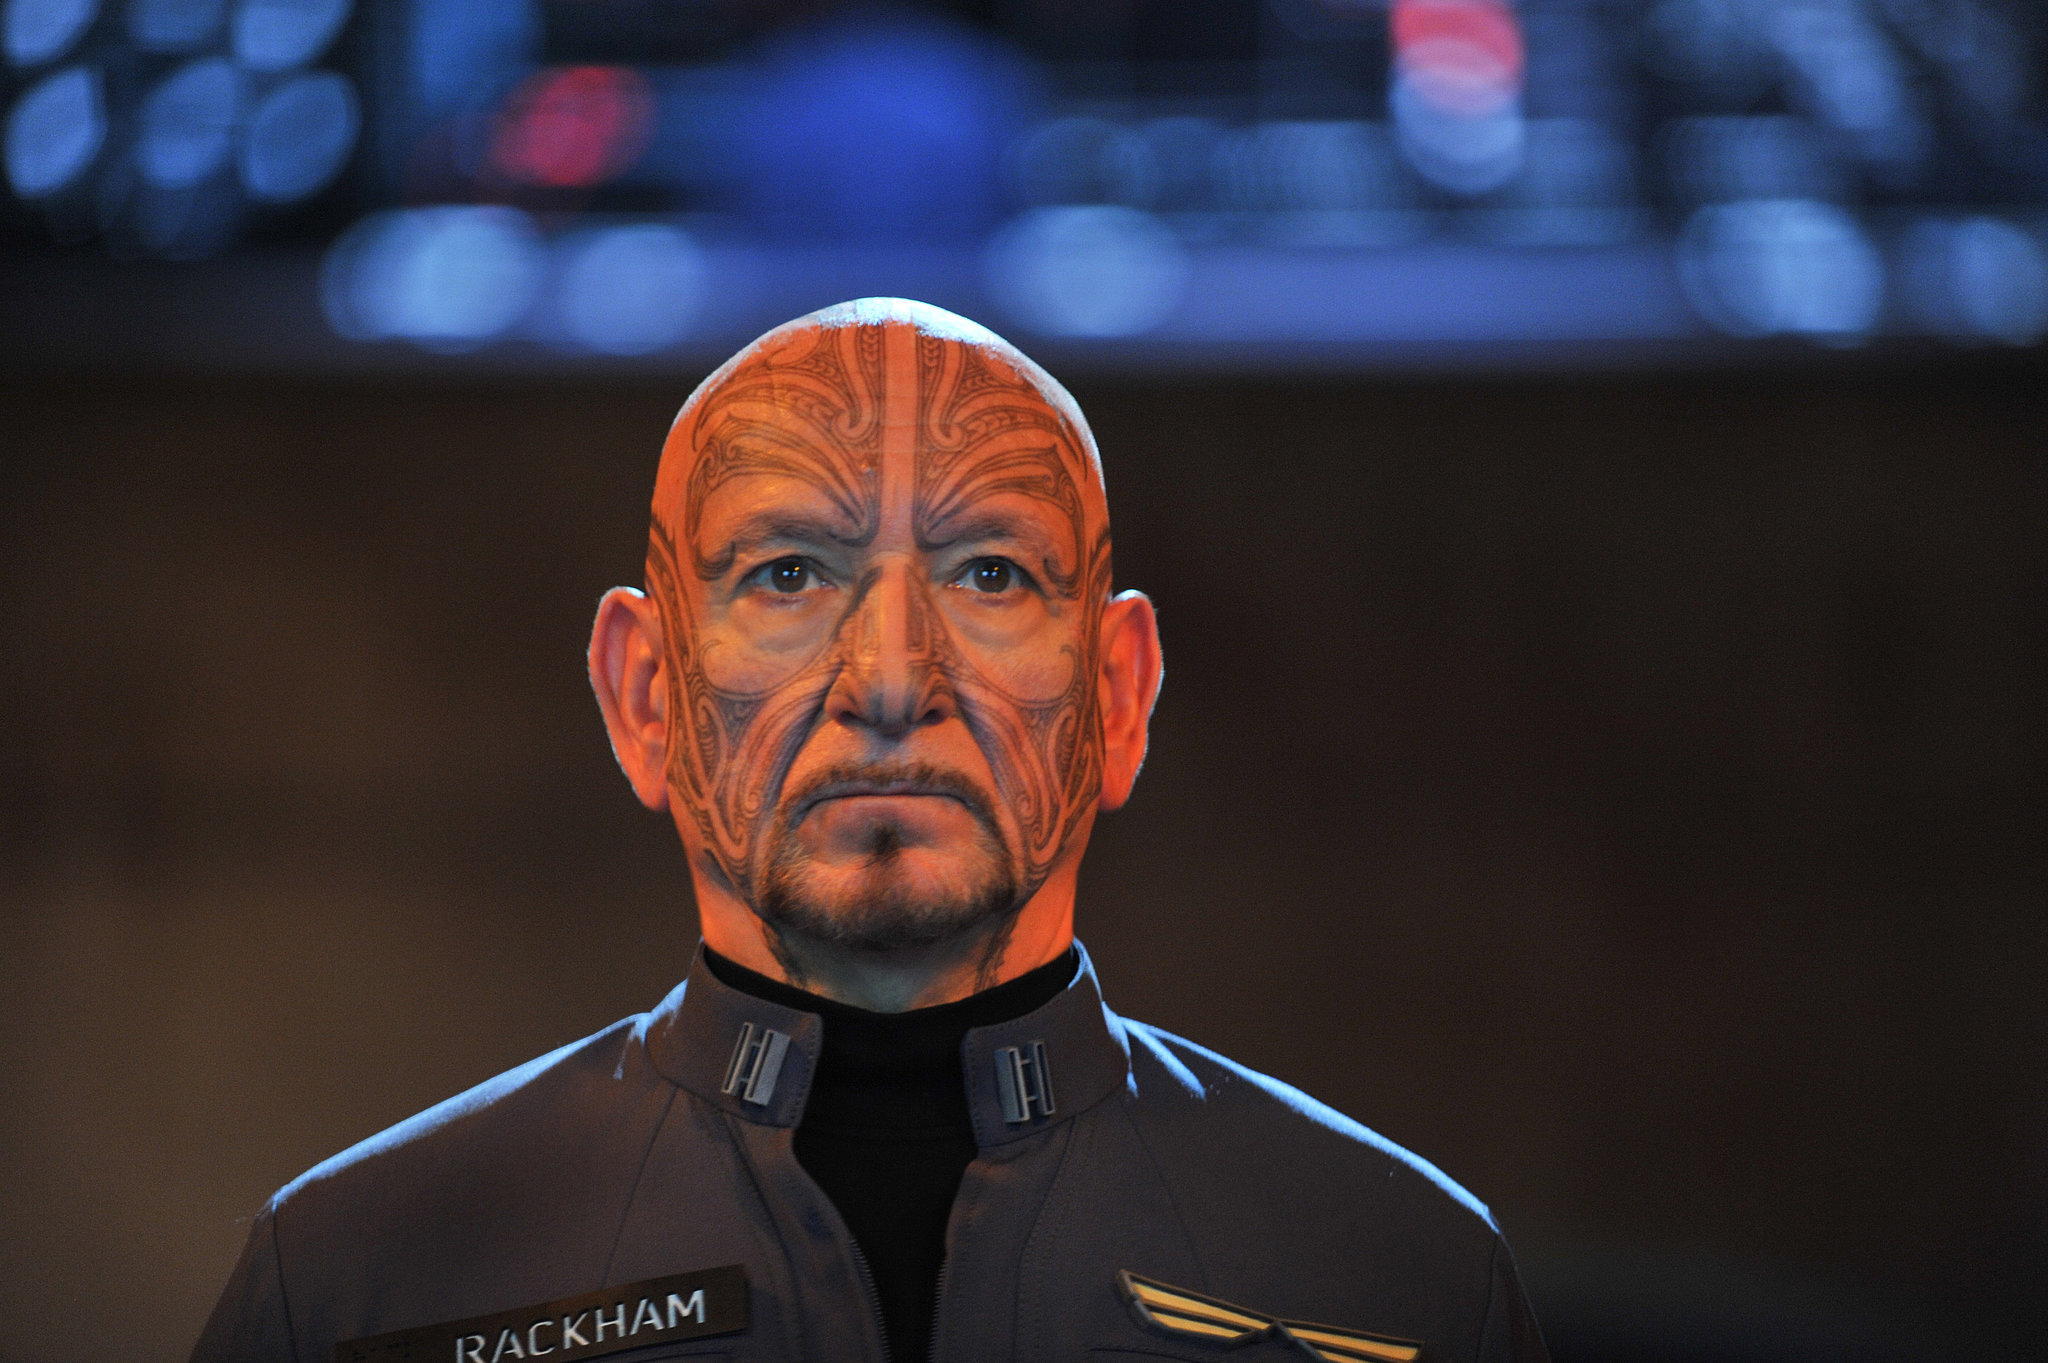 Ben Kingsley sports the facial tattoos Ed Helms will be getting in